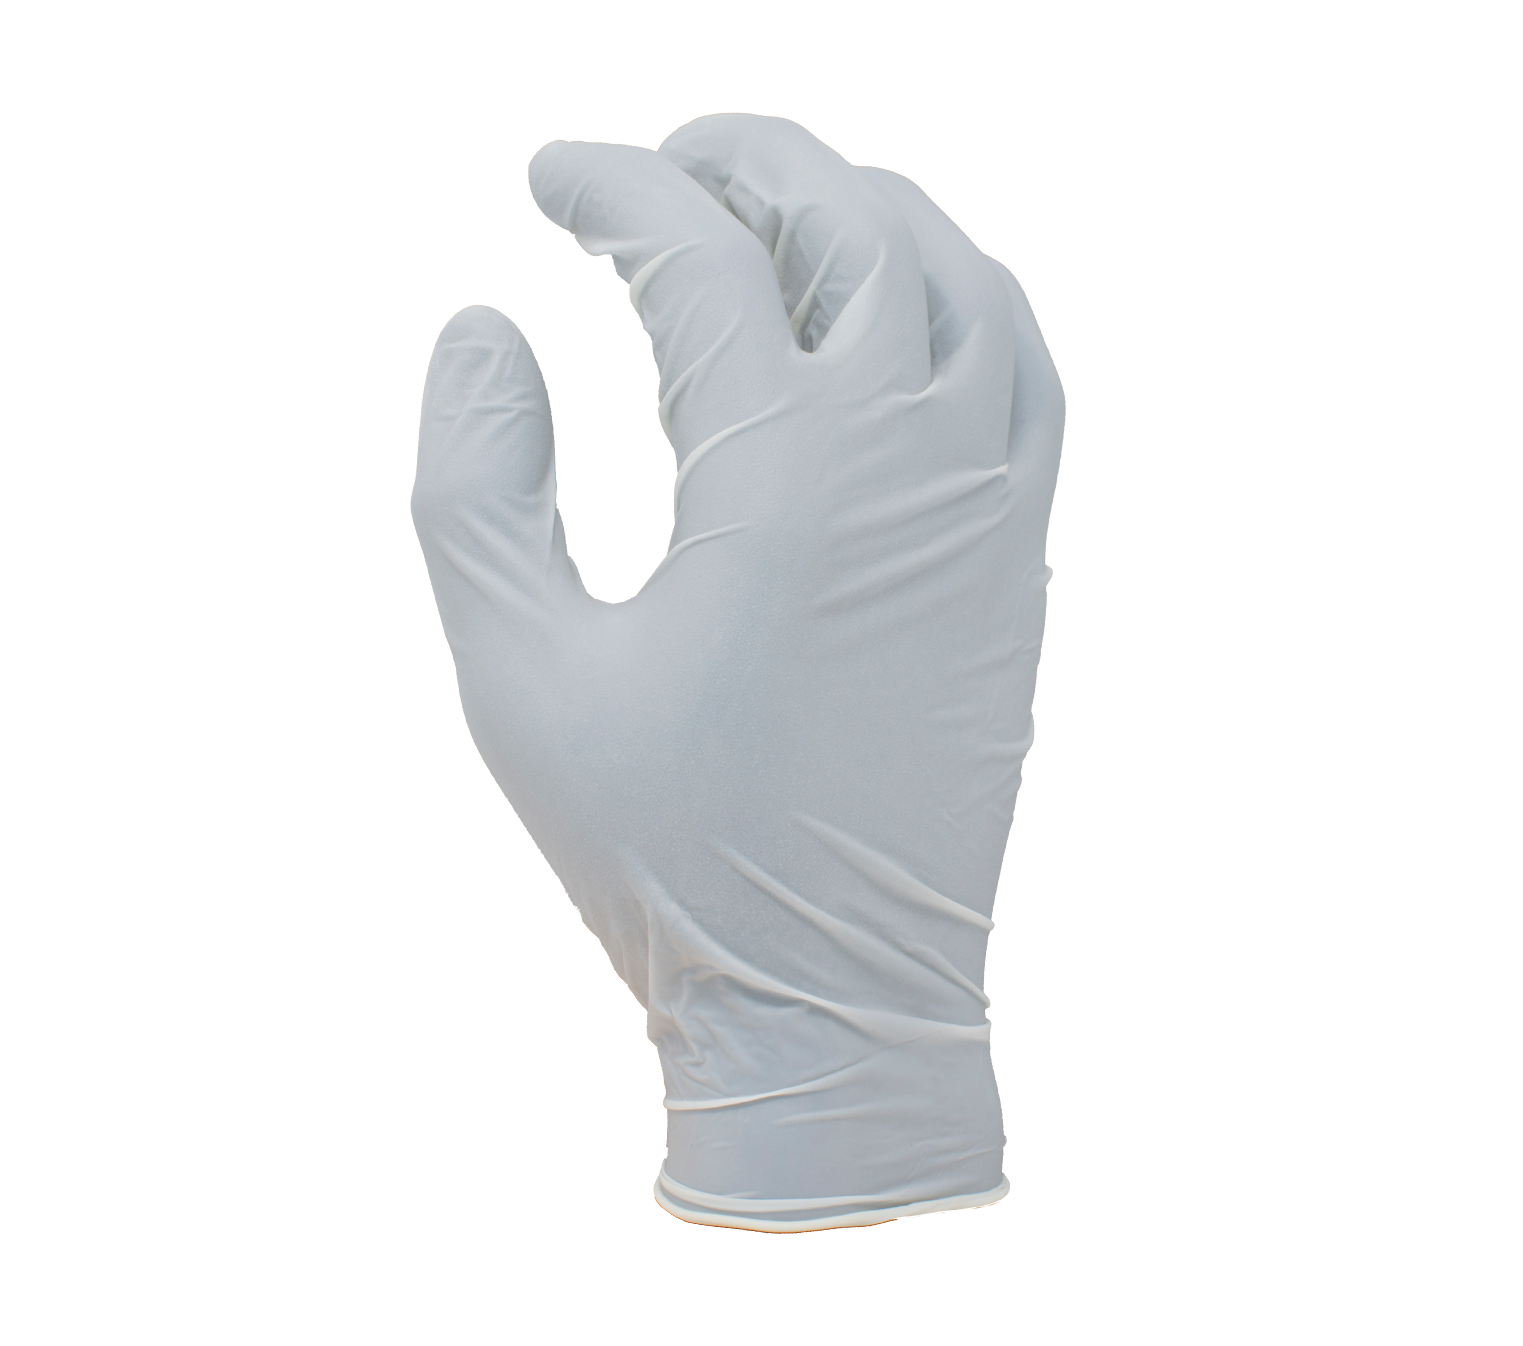 3.5 Mil White Latex Disposable Gloves, 9 1/2" Length, Powder-free, Textured Finish, Industrial Grade